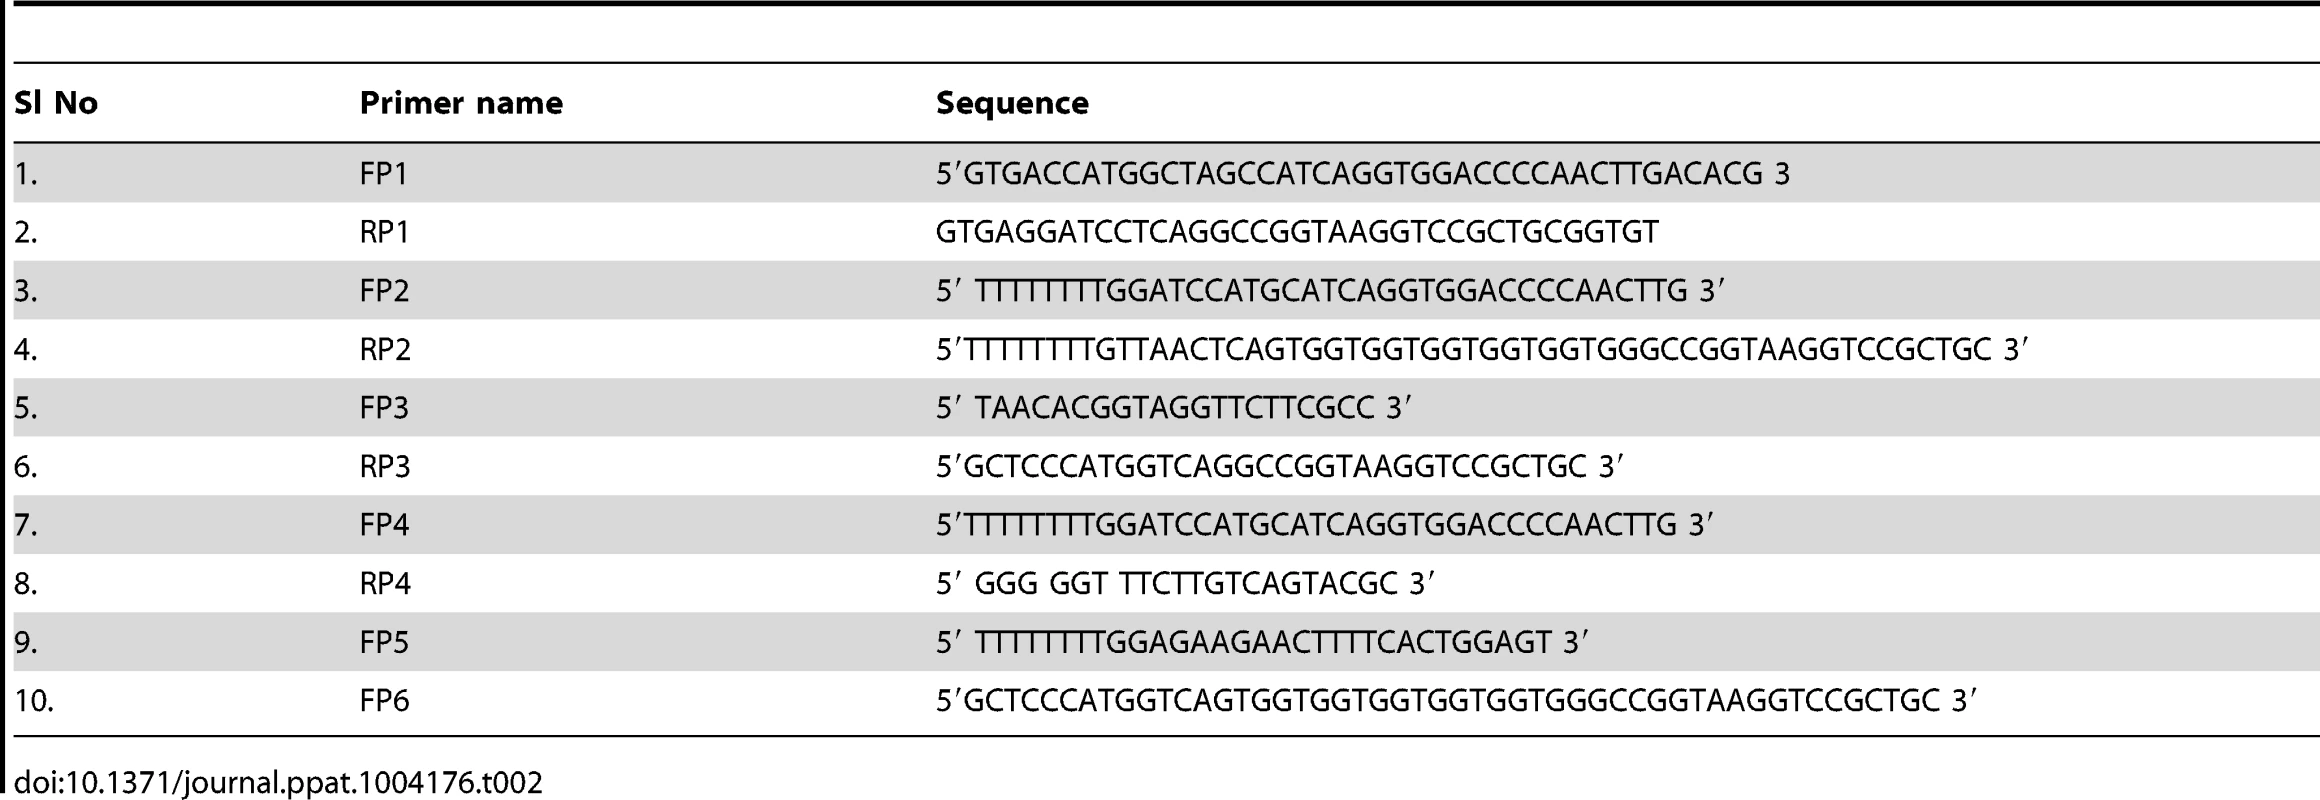 Sequences of oligonucleotide primers used in the study.